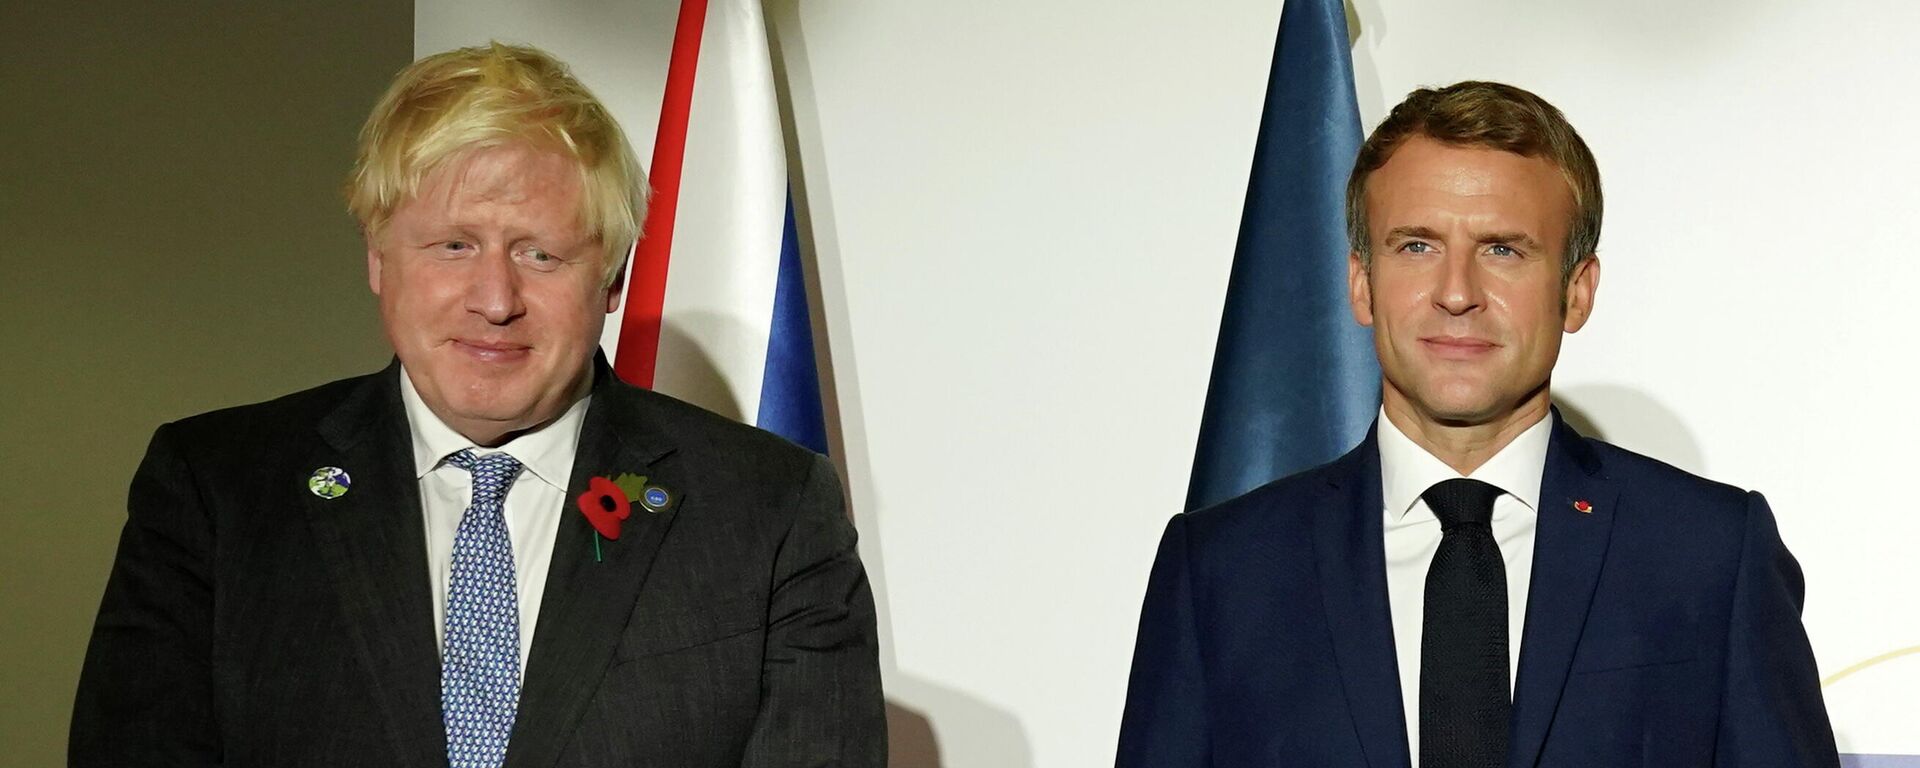 Britain's Prime Minister Boris Johnson and France's President Emmanuel Macron pose for a photo during their meeting with U.S. President Joe Biden and Germany's Chancellor Angela Merkel to discuss Iran's nuclear program, on the sidelines of the G20 leaders' summit in Rome, Italy October 30, 2021. - Sputnik International, 1920, 13.11.2021